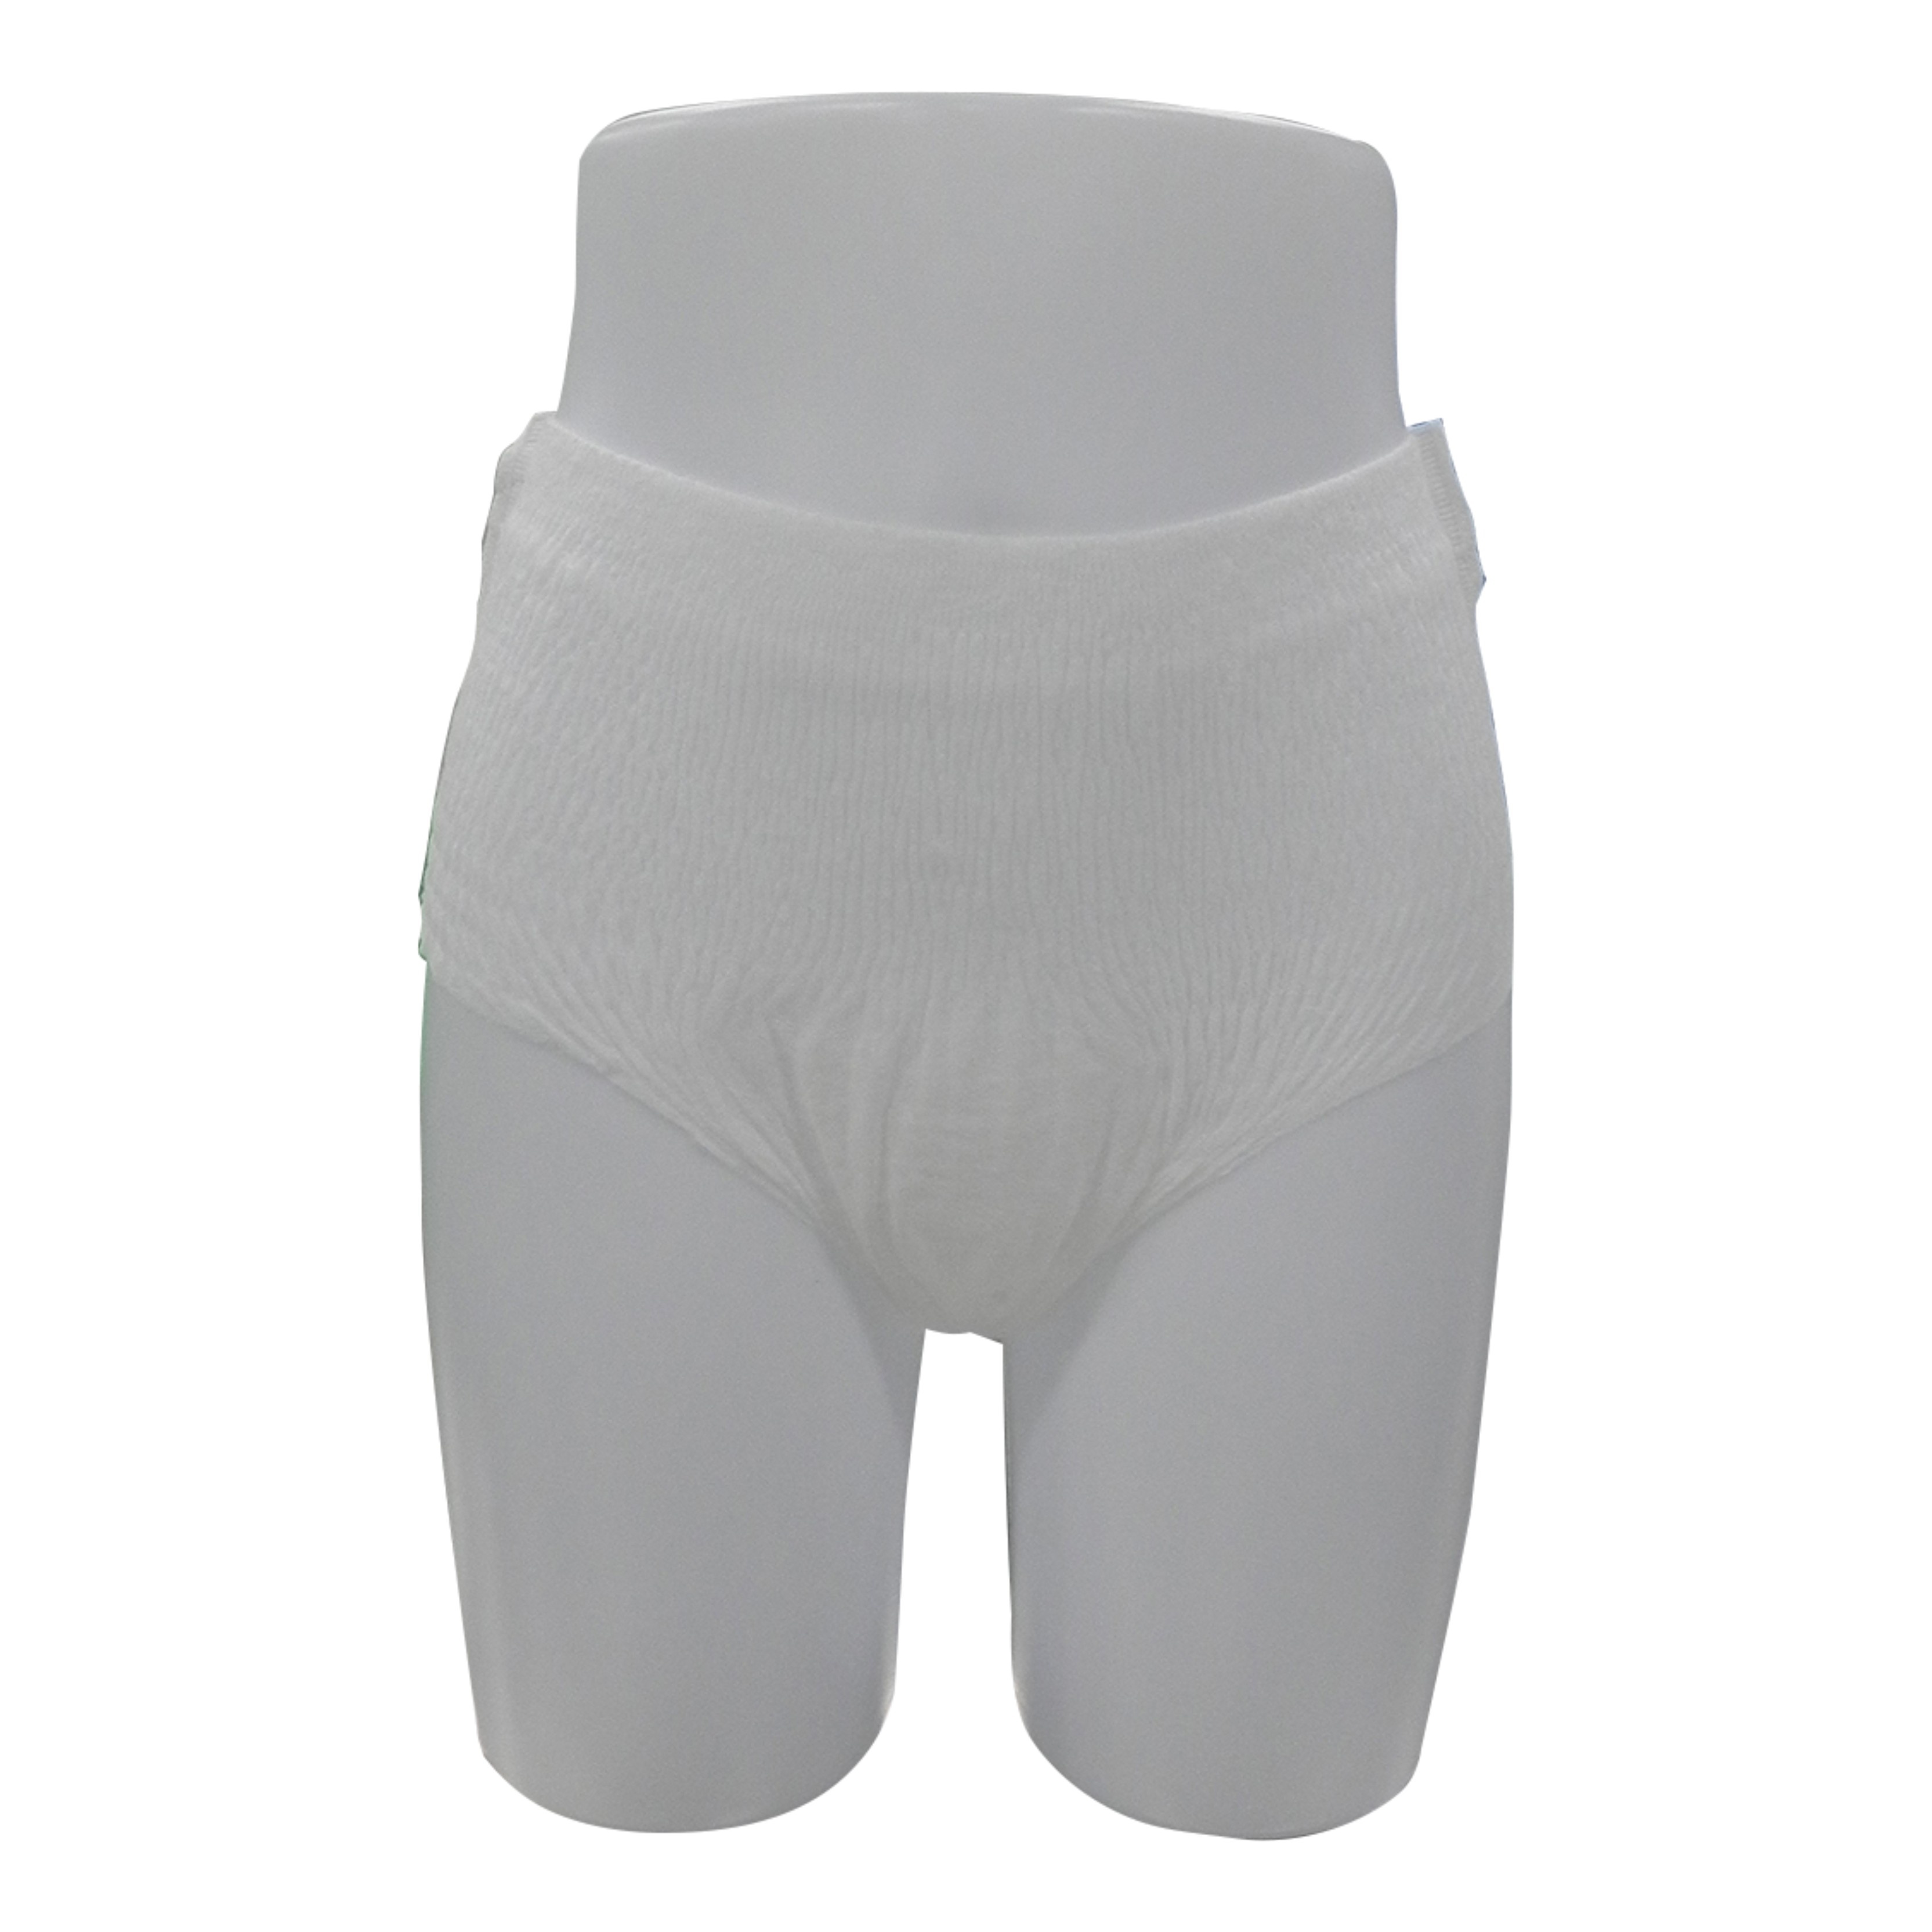 super sleepy lady women sanitary napkins female period pants in pull up style